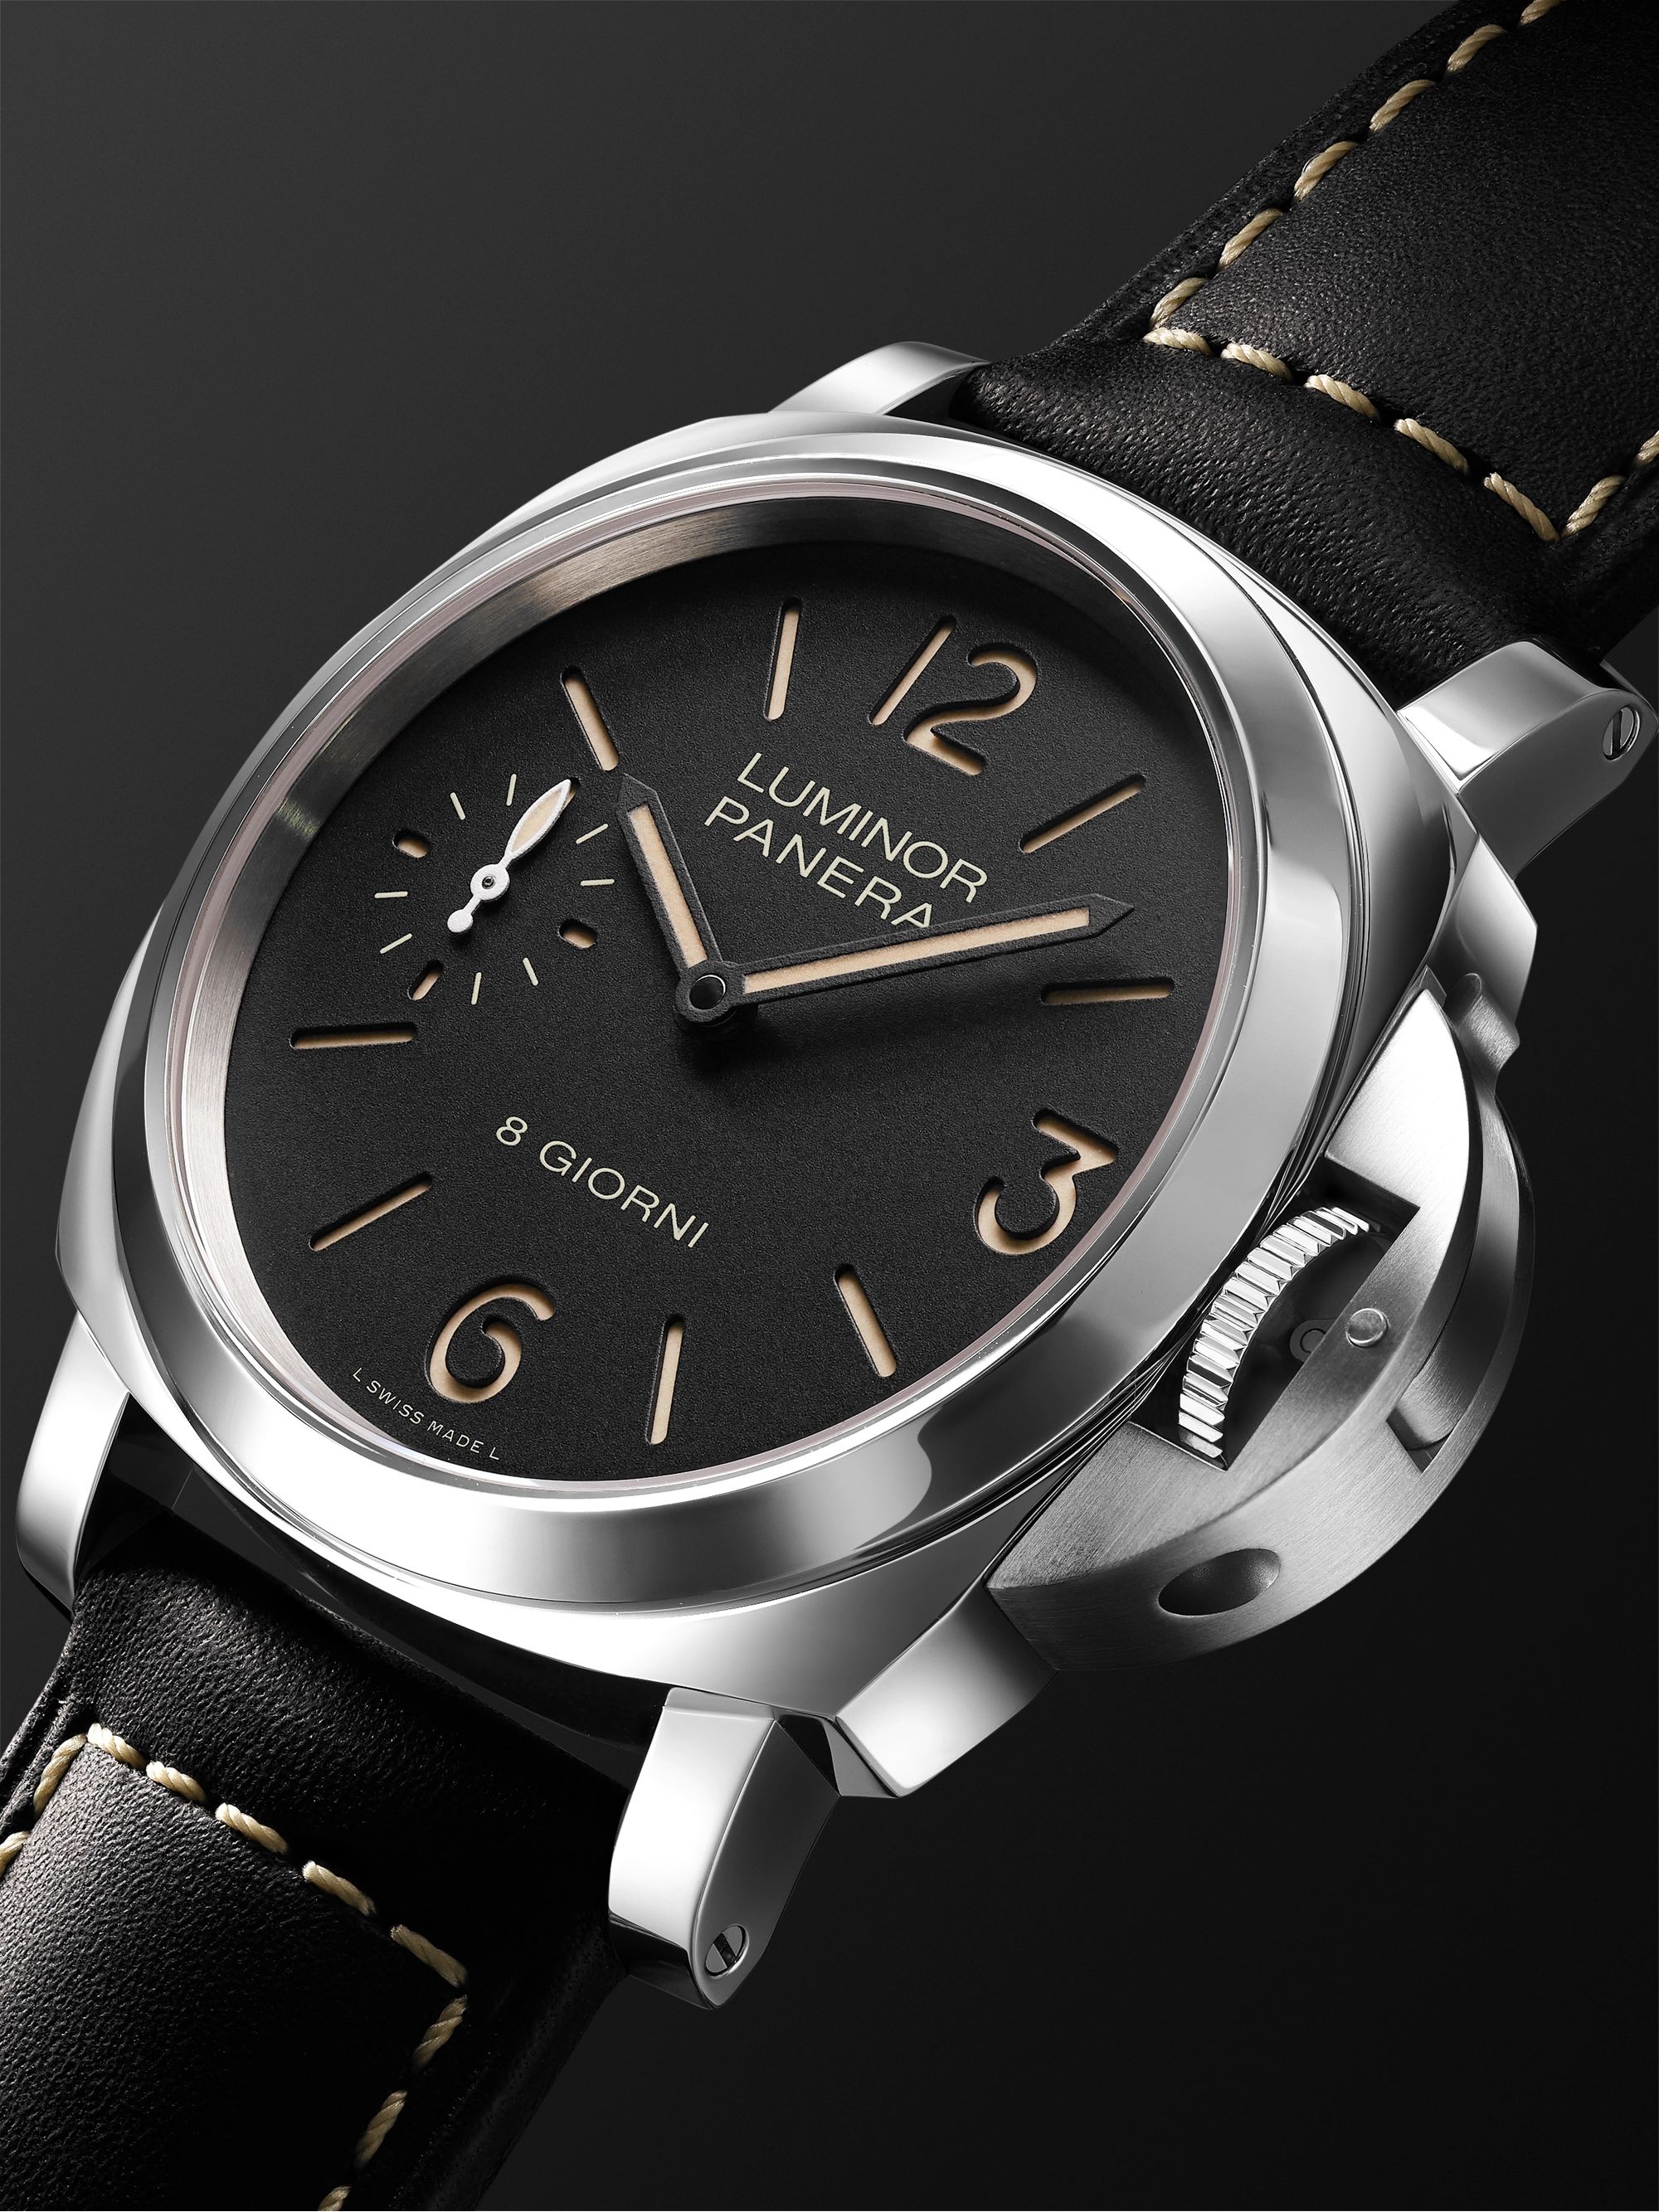 PANERAI Luminor 8 Days 44mm Stainless Steel and Leather Watch, Ref. No. PAM00915